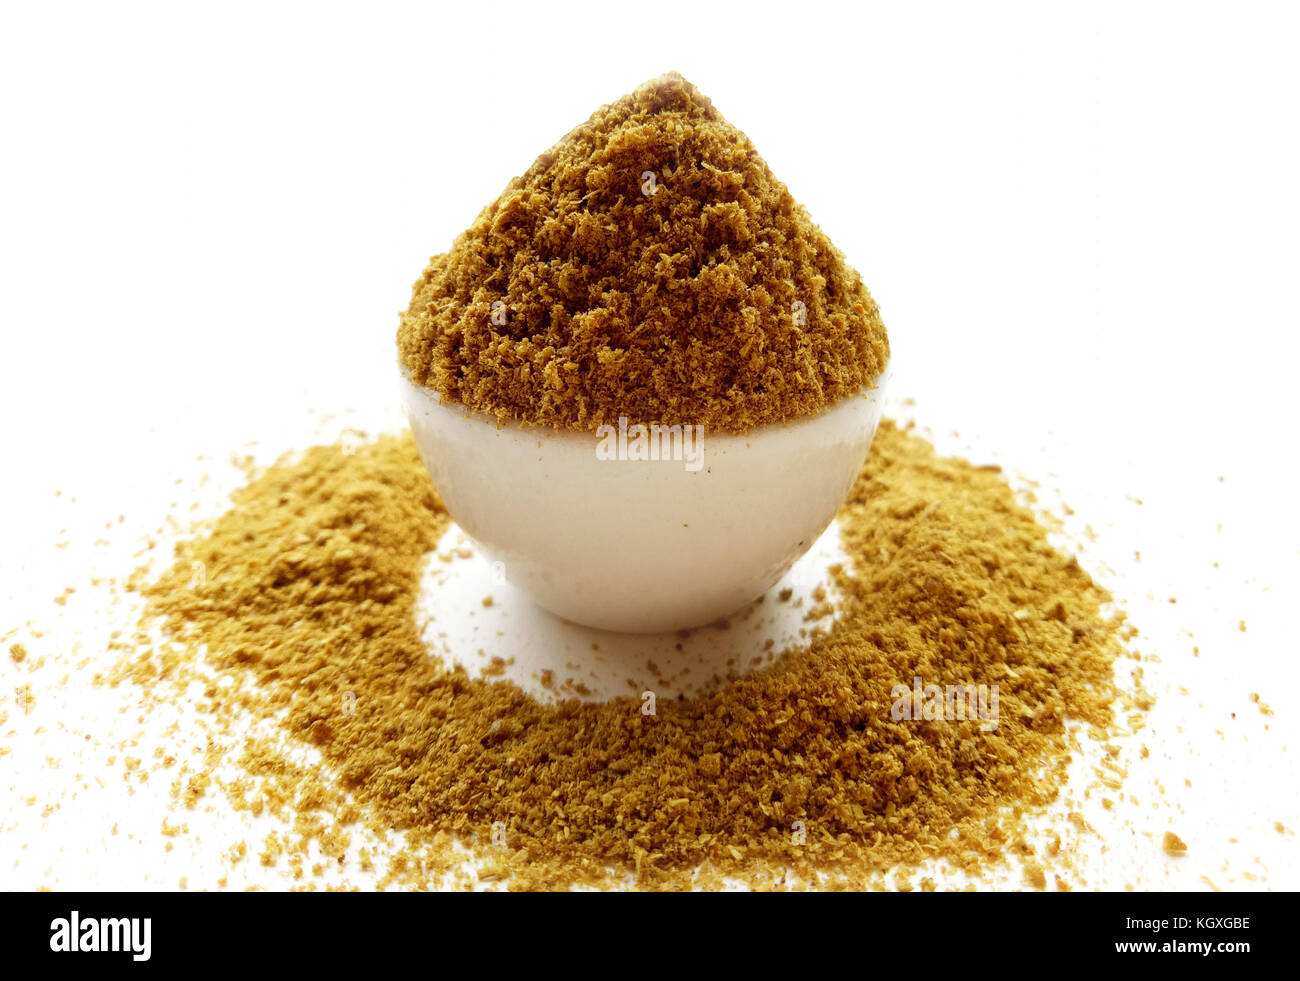 Coriander Powder Spice Food Ingredient Stock Photo Alamy,How Long Do Cats Live Indoors